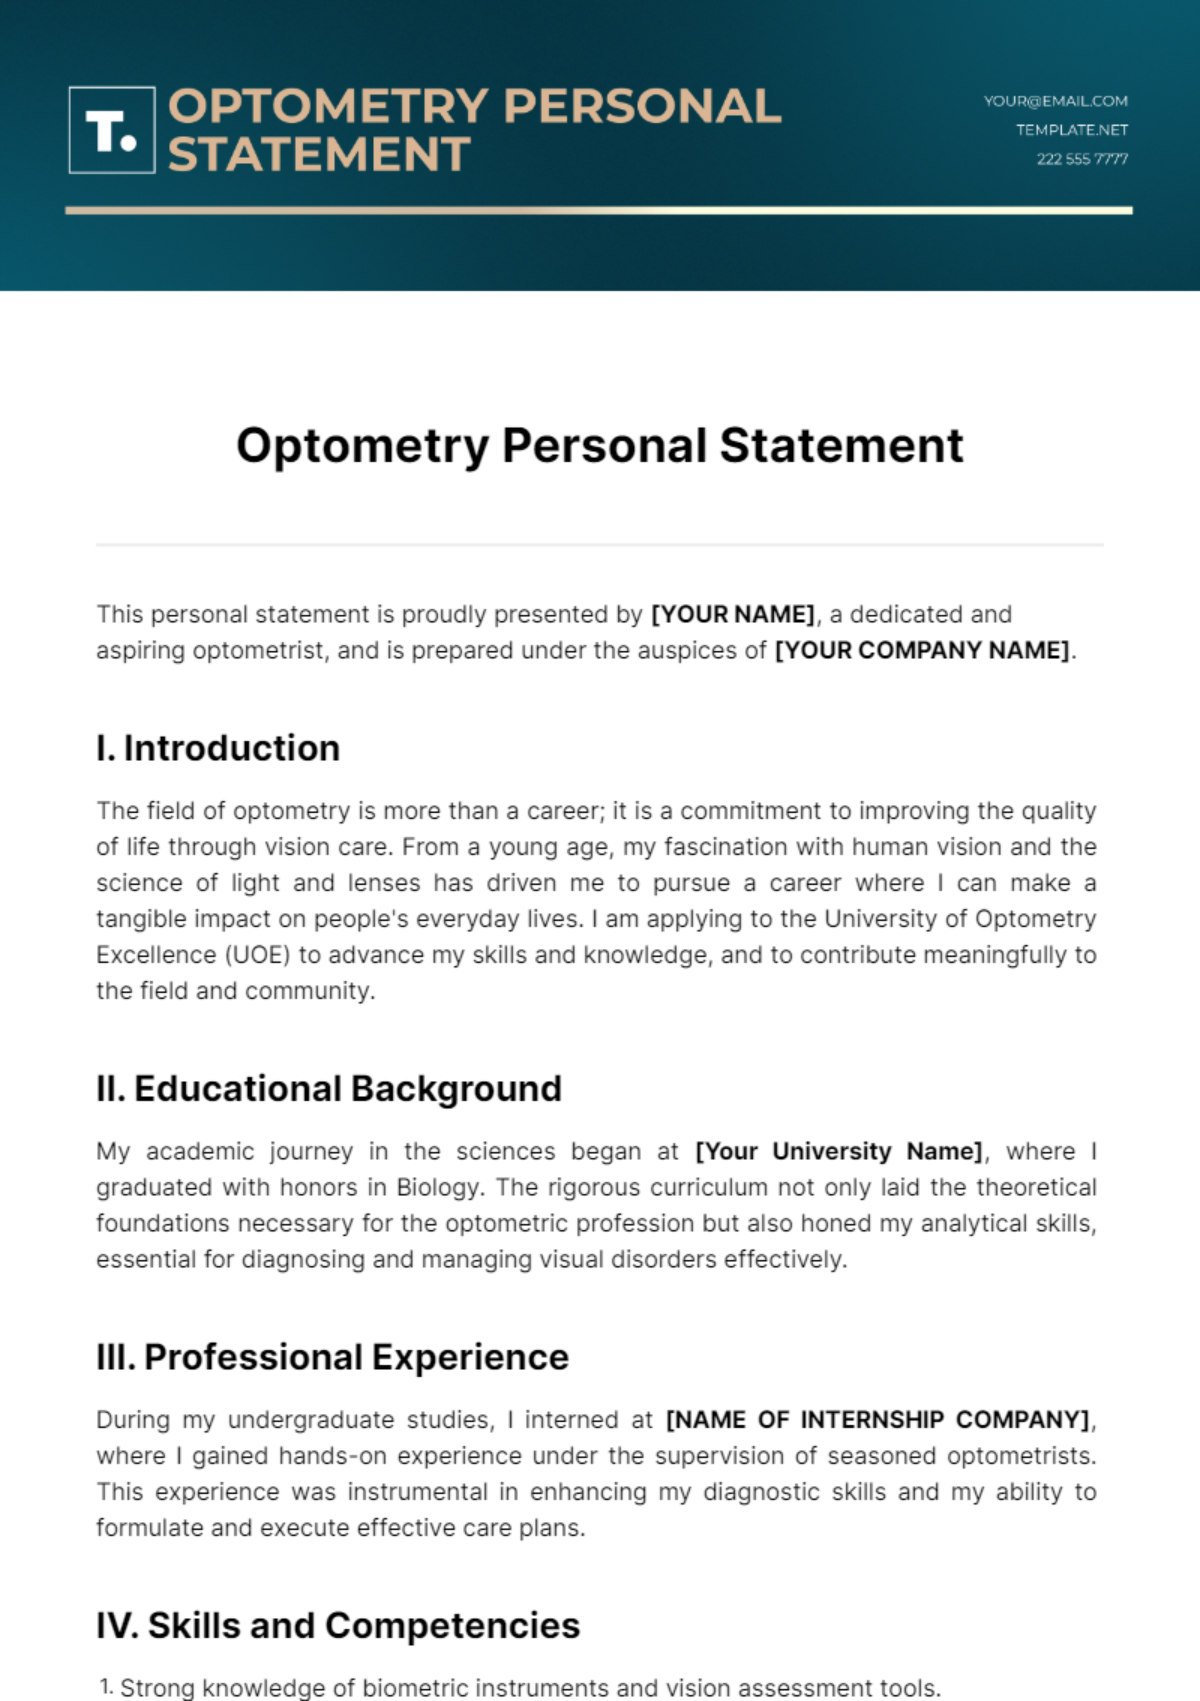 Optometry Personal Statement Template